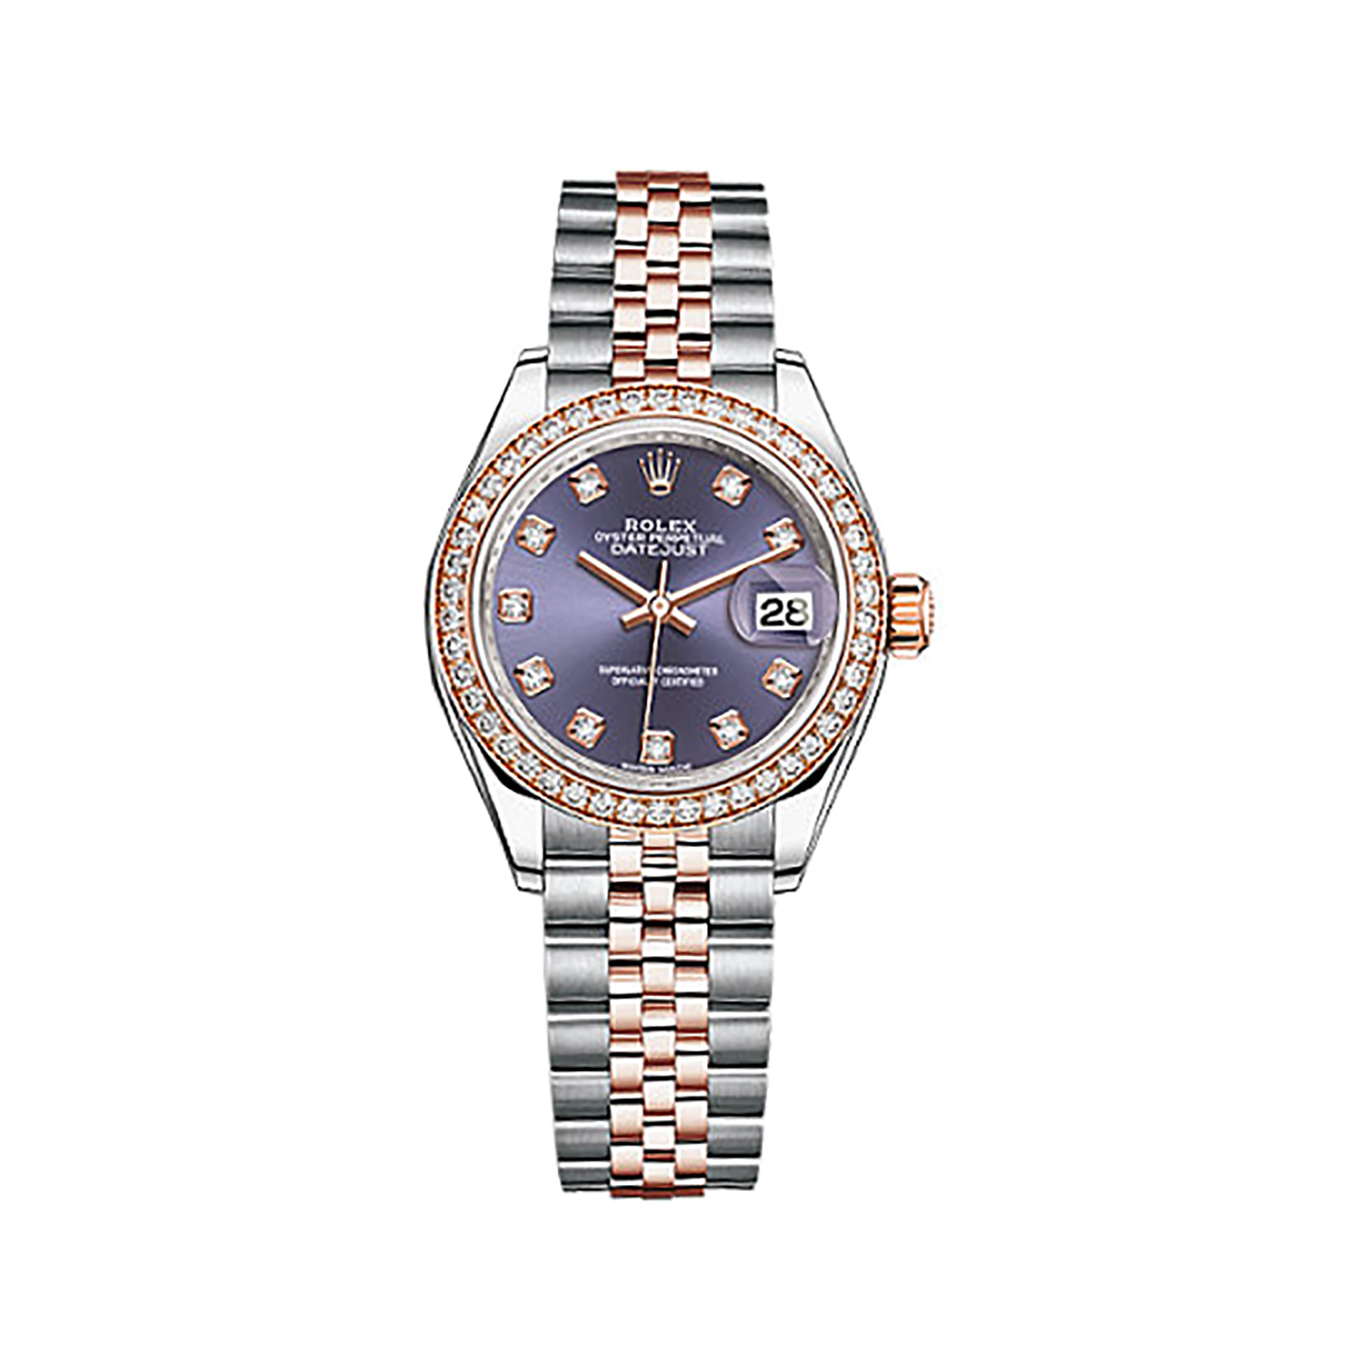 Lady-Datejust 28 279381RBR Rose Gold & Stainless Steel & Diamonds Watch (Aubergine Set with Diamonds)